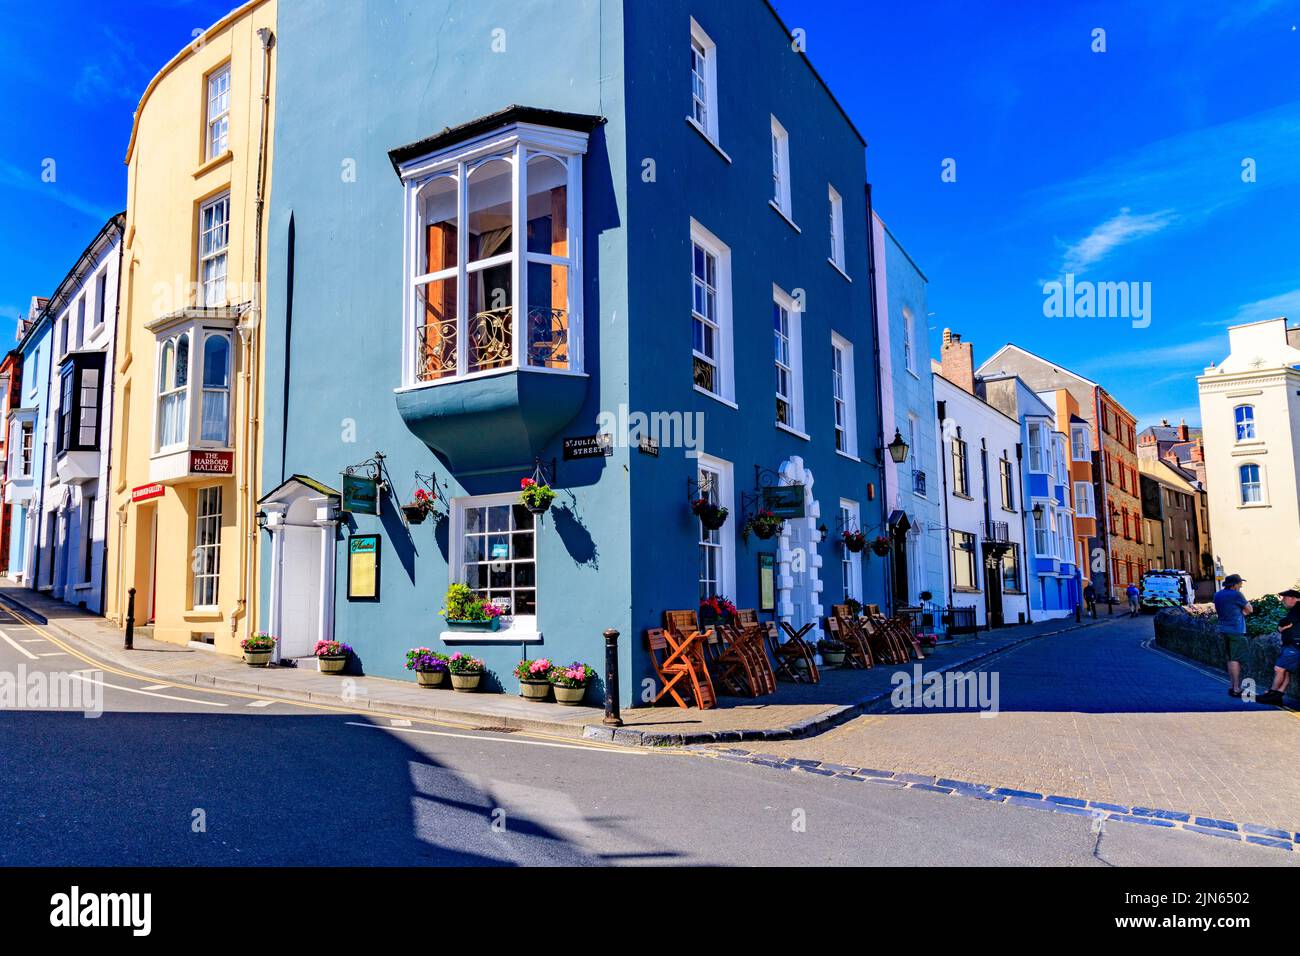 Colourful Georgian architecture at Castle Hill overlooking the harbour in Tenby, Pembrokeshire, Wales, UK Stock Photo